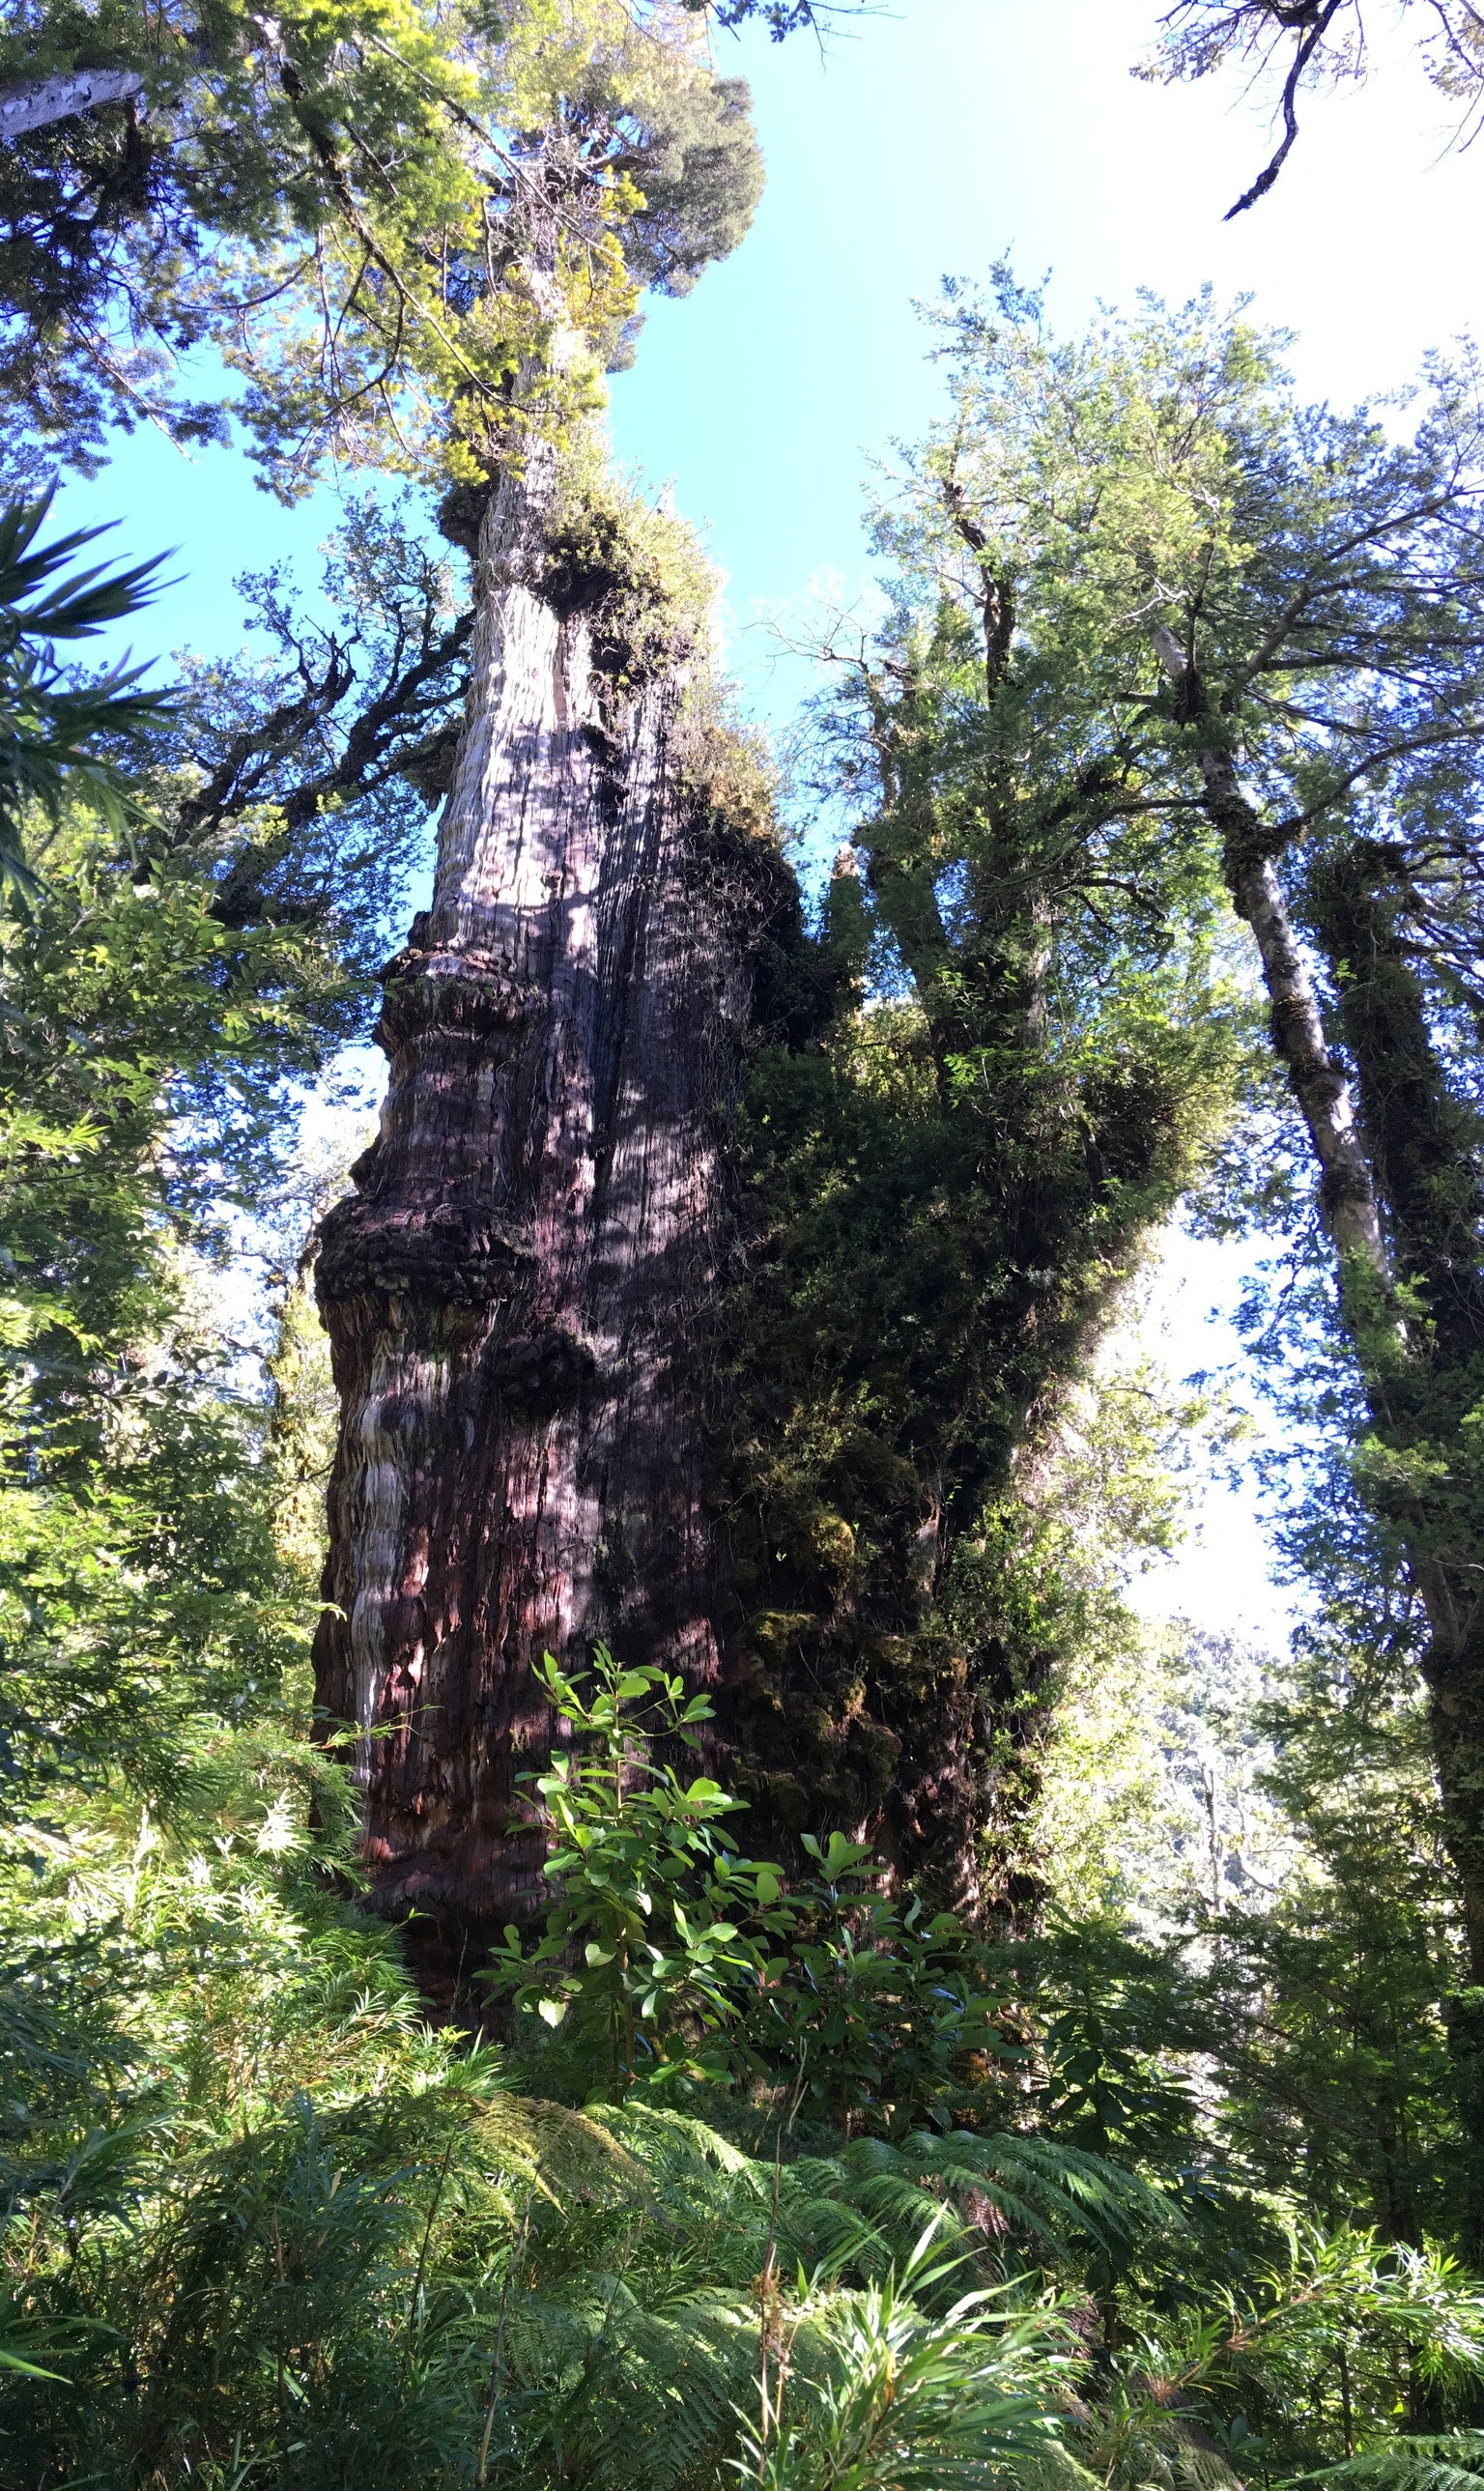 Scientists could not determine the exact age of the tree based on the massive trunk